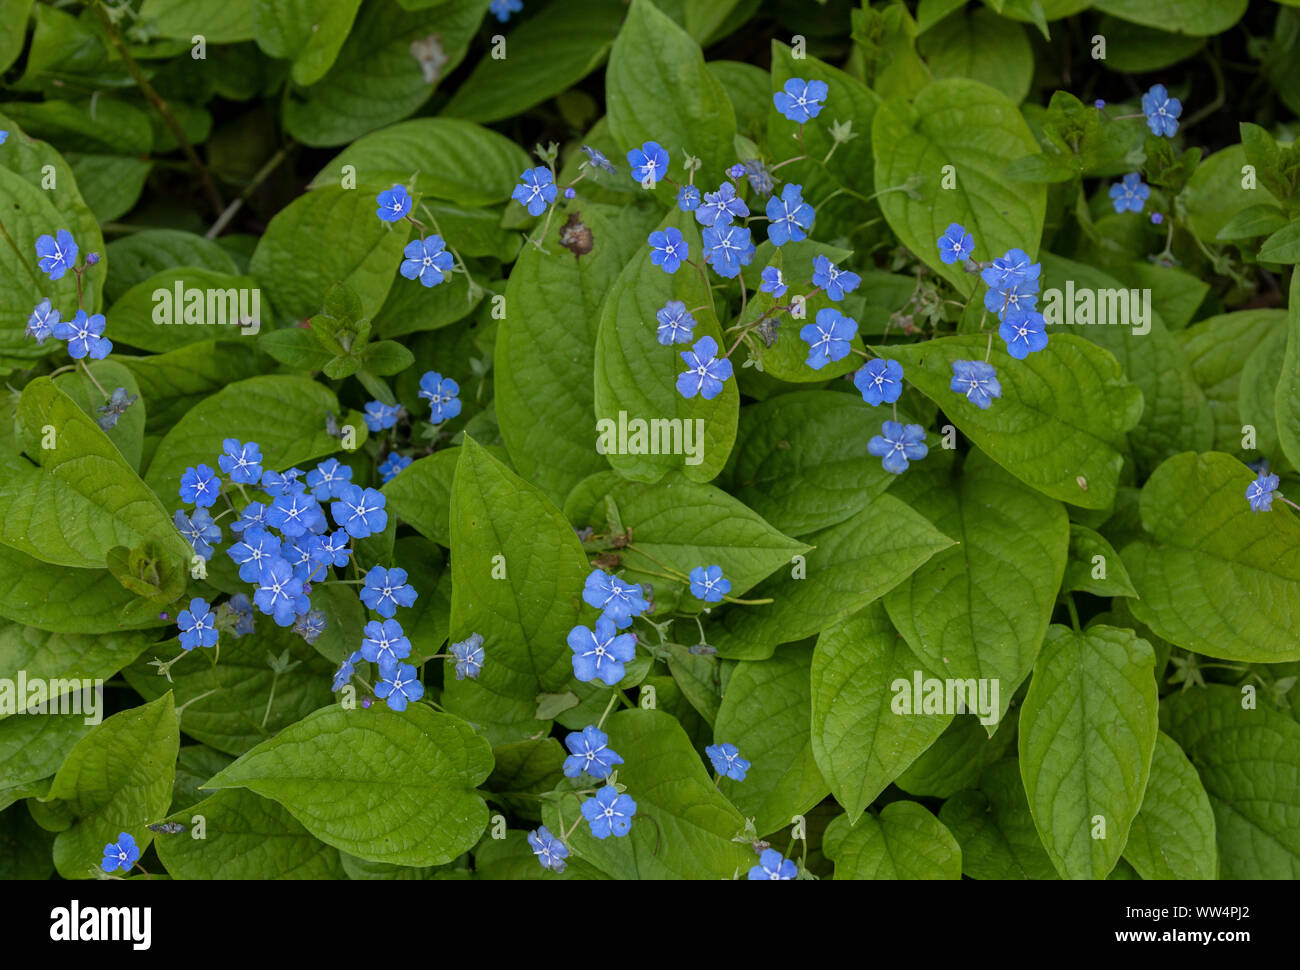 Blue-eyed-Mary, Omphalodes verna in flower in spring garden. Stock Photo